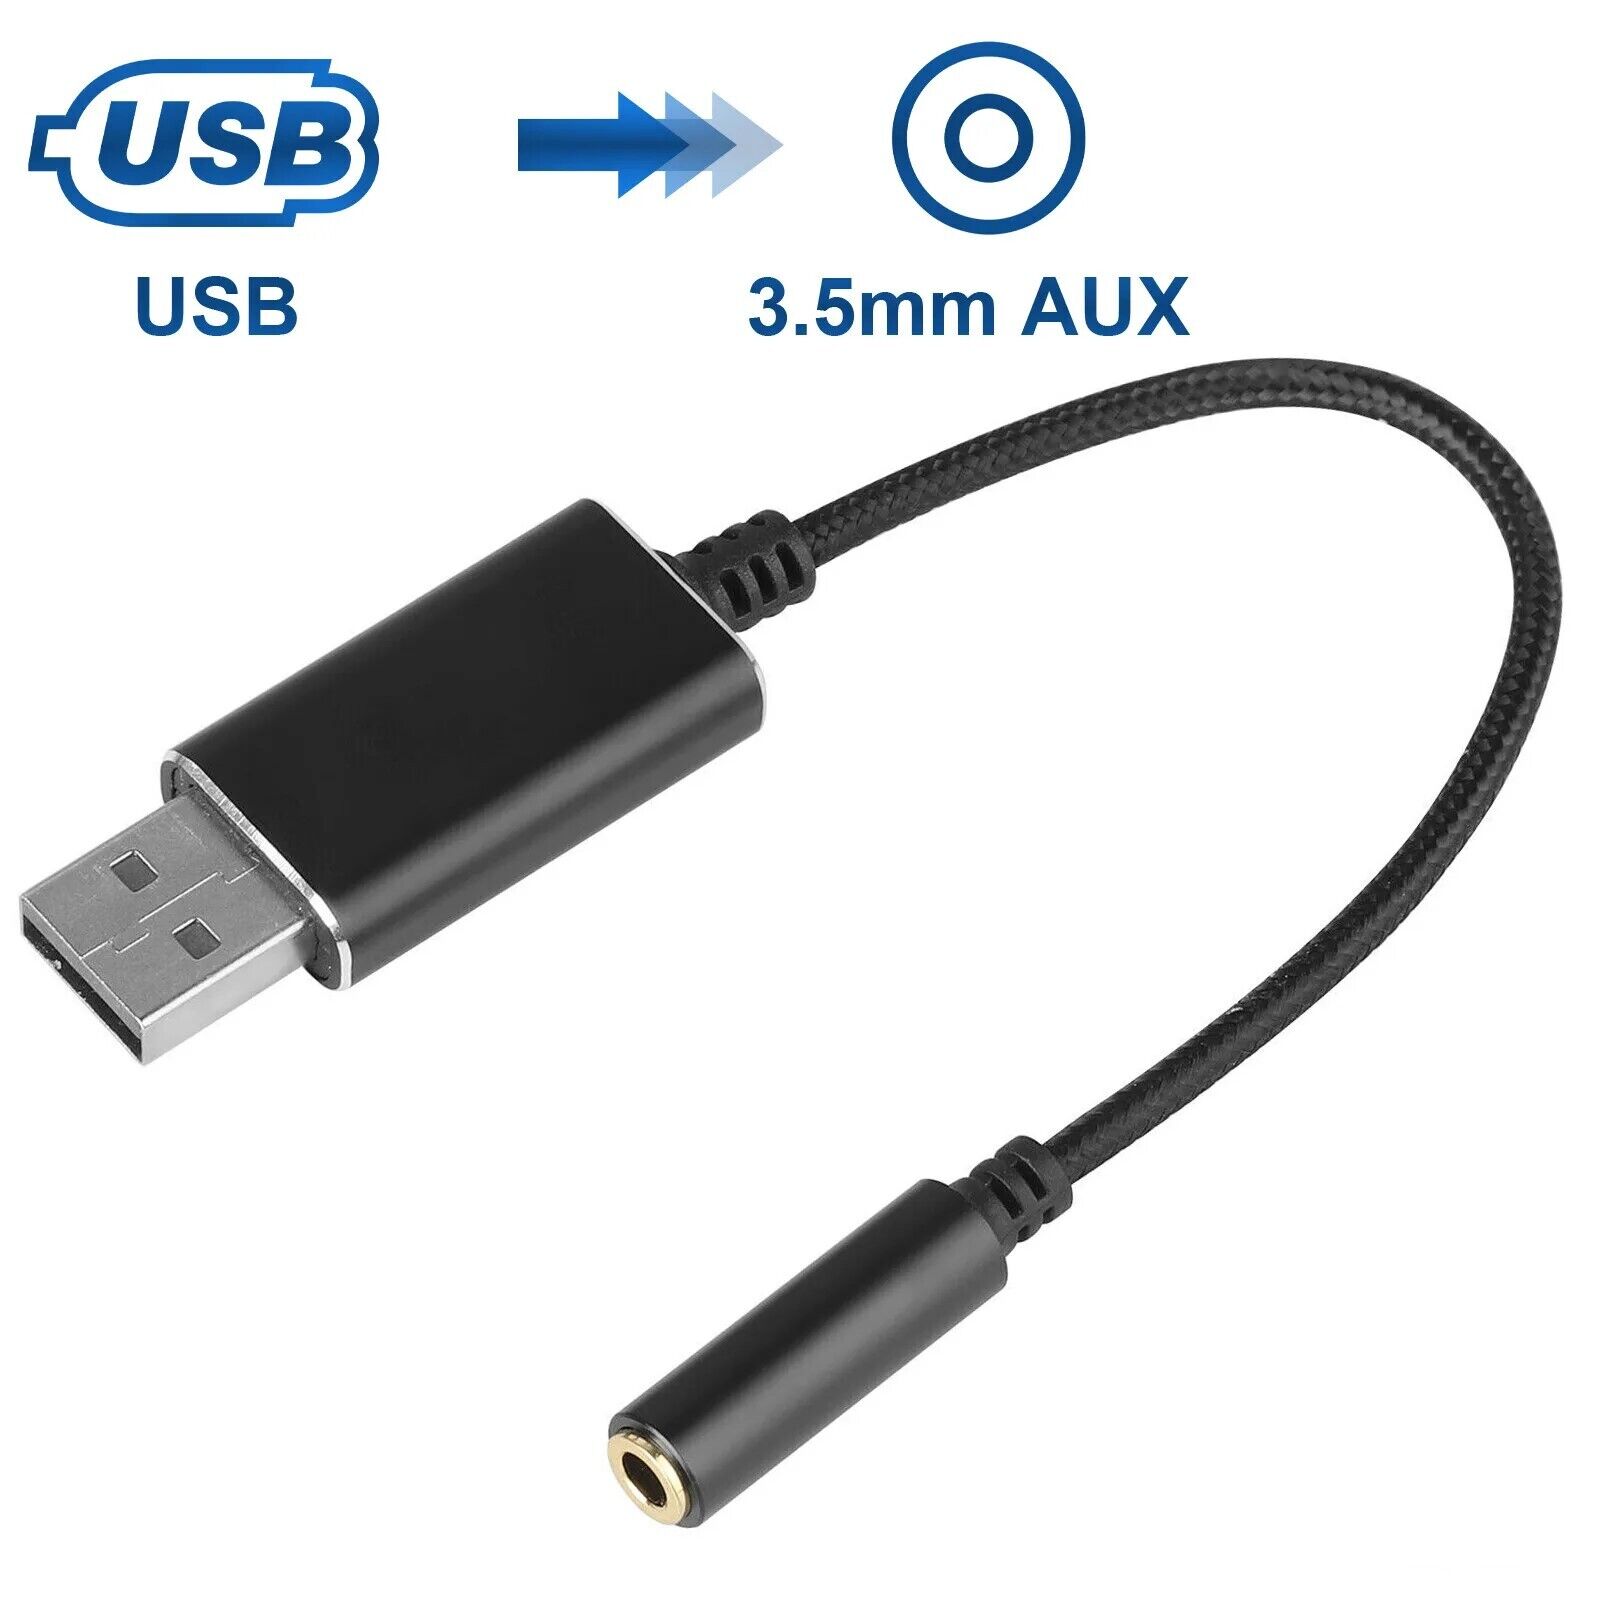 USB to 3.5MM Aux Audio Jack Headphone Cable Adapter For PC PS4 Laptop Desktop